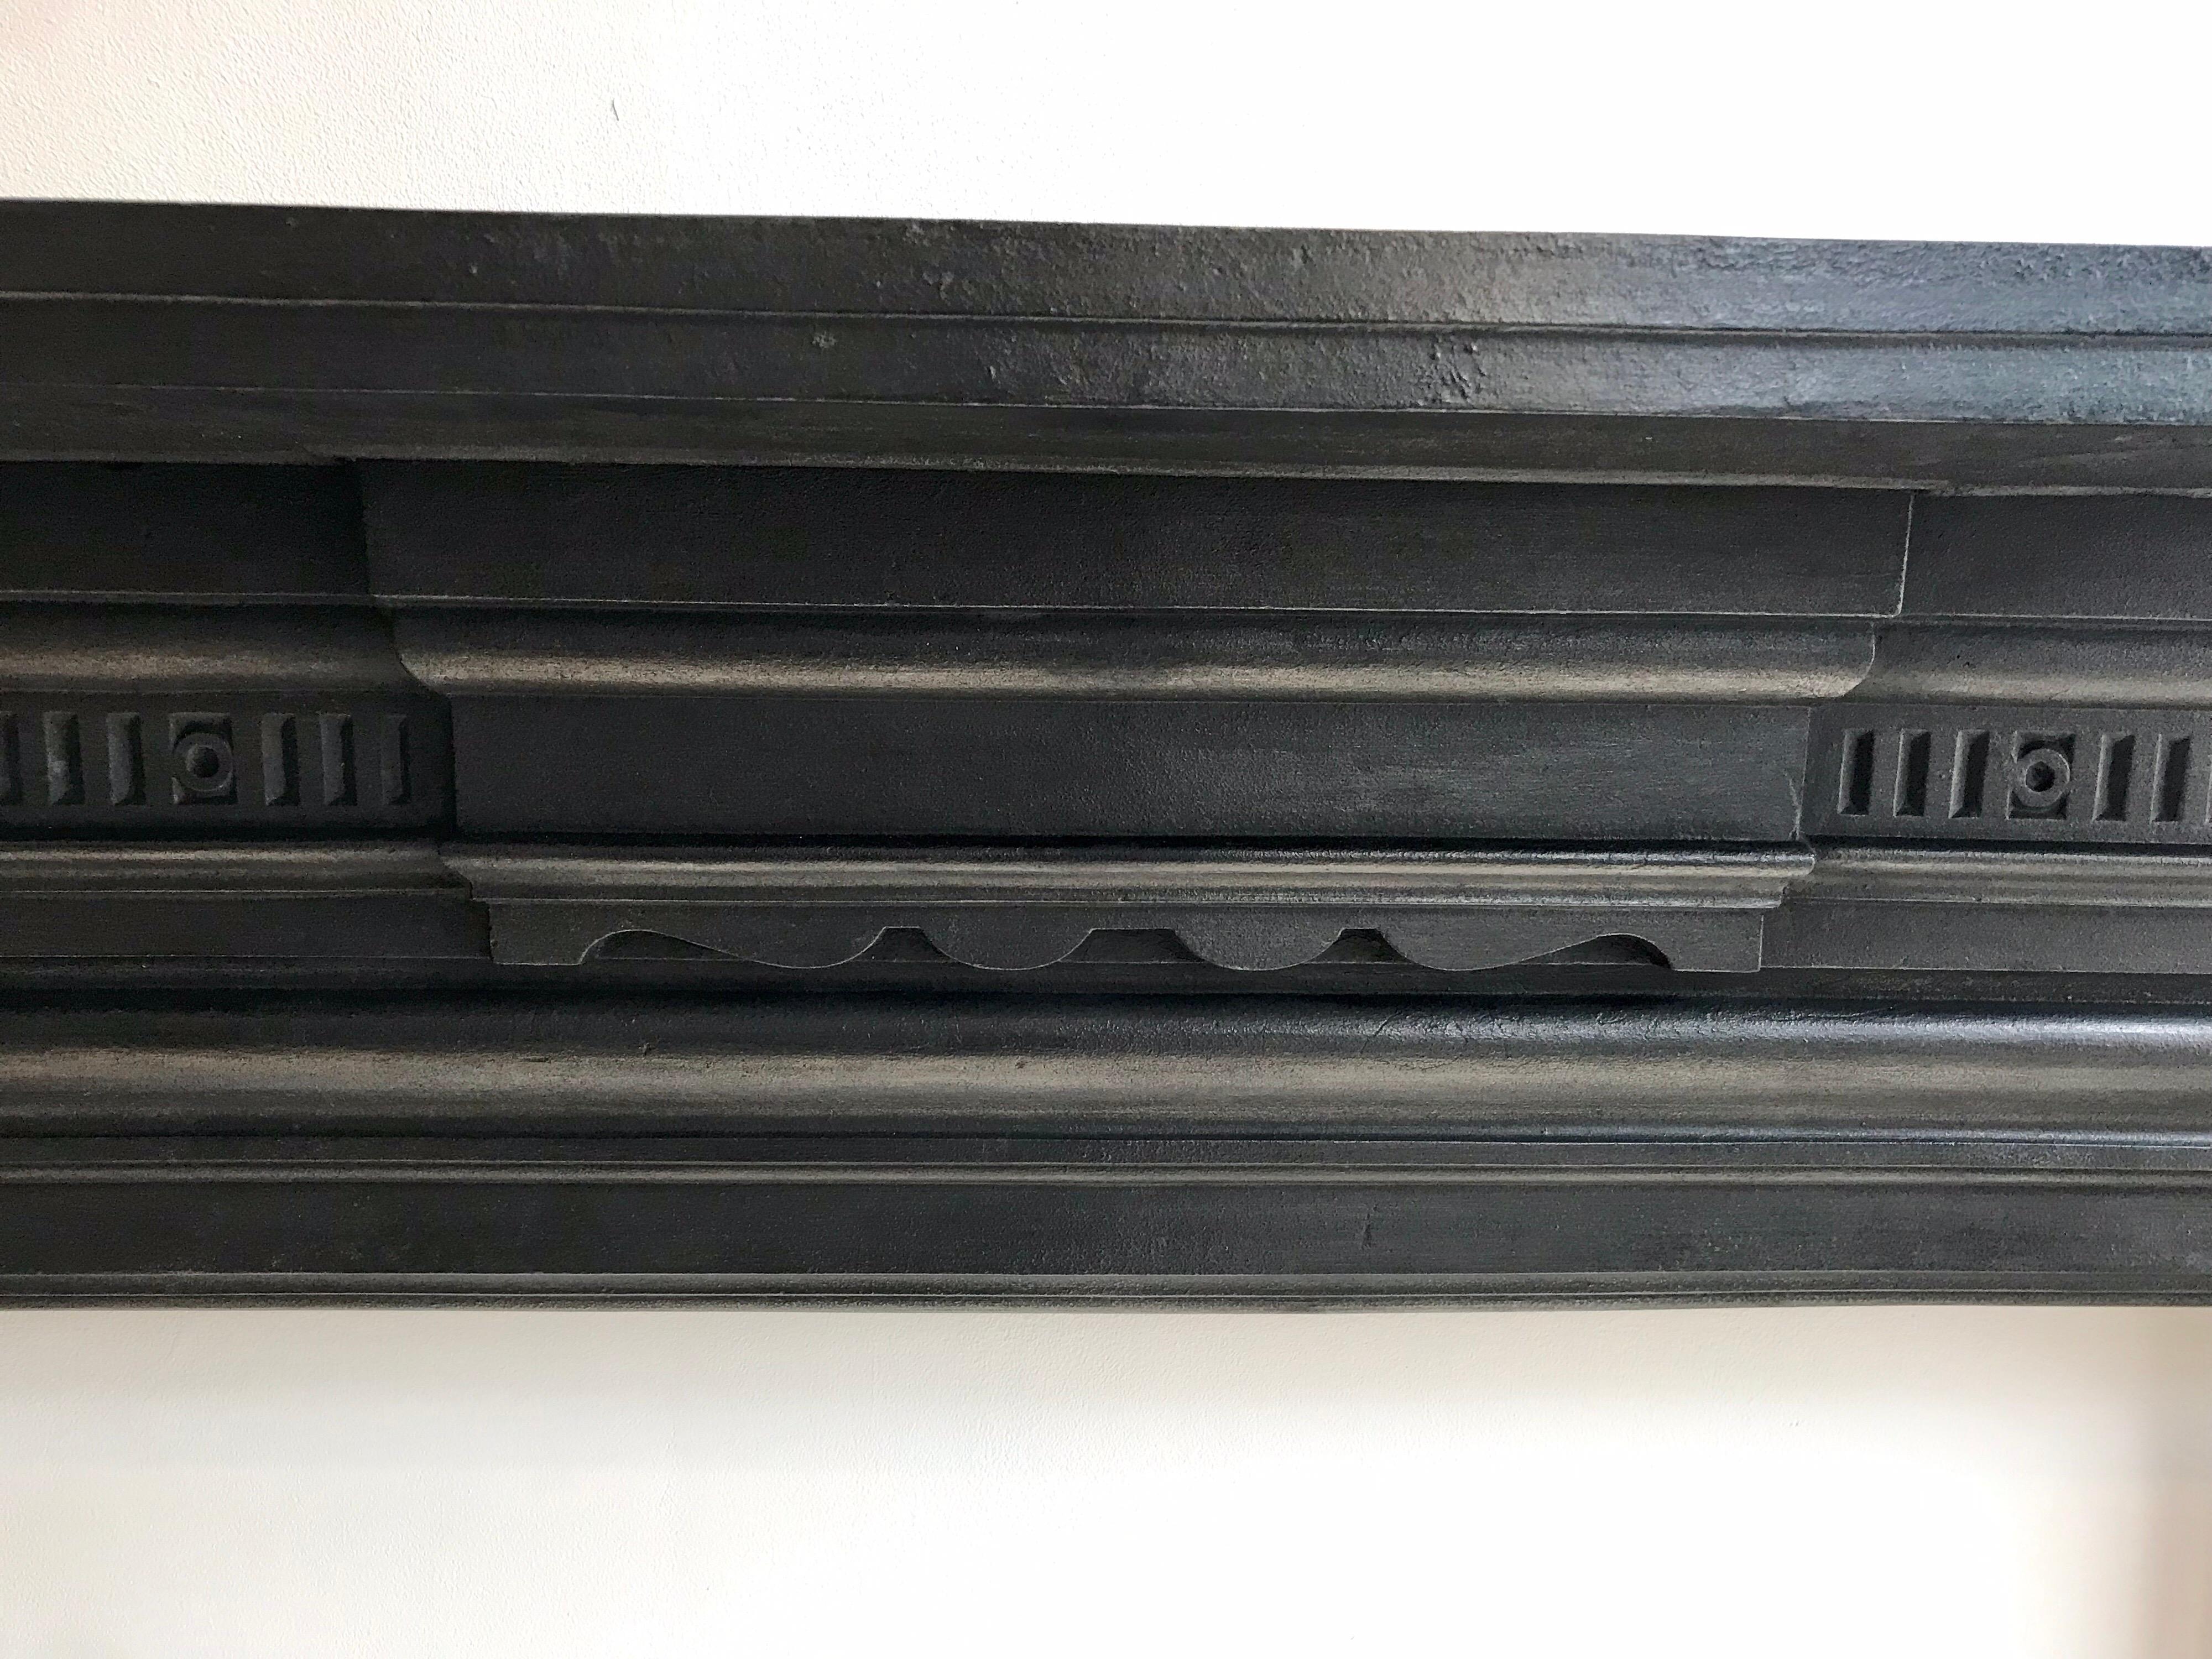 An original British Victorian antique cast iron fireplace mantelpiece.
Recently salvaged from a London Town House.
Nice simple cast iron design with traditional blackened finish.